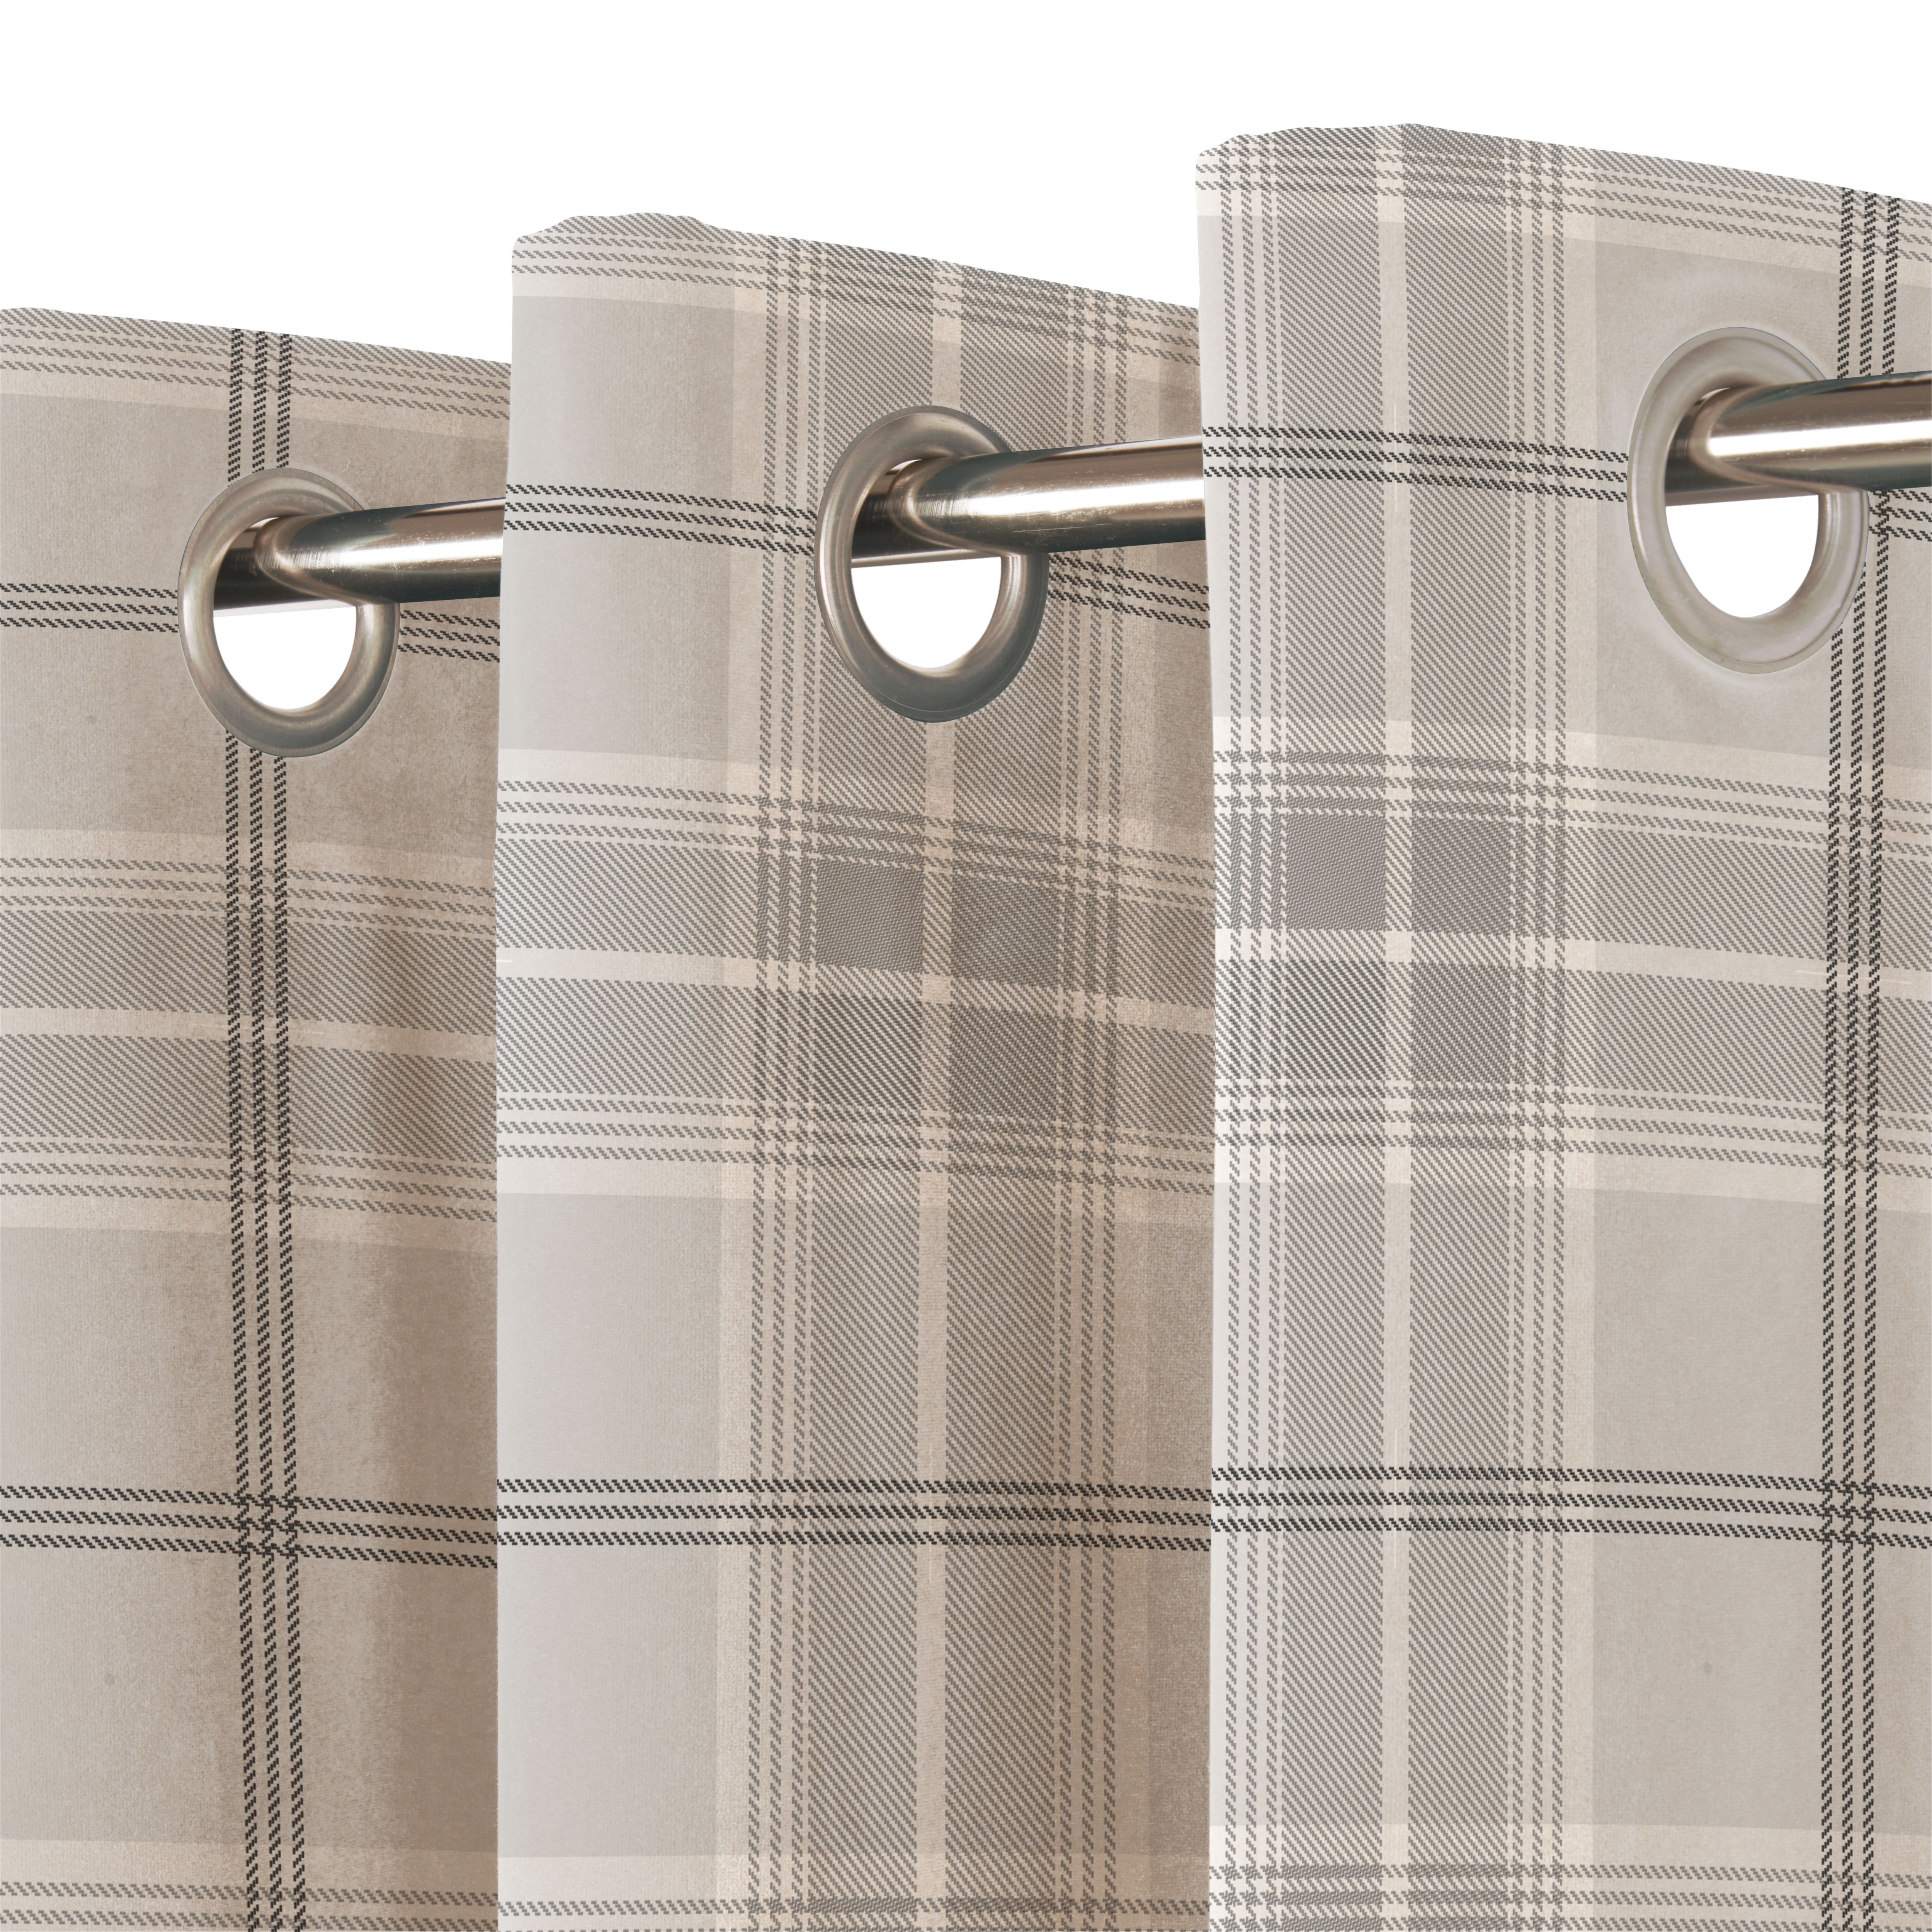 Podor Beige Check Lined Eyelet Curtain (W)228cm (L)228cm, Pair